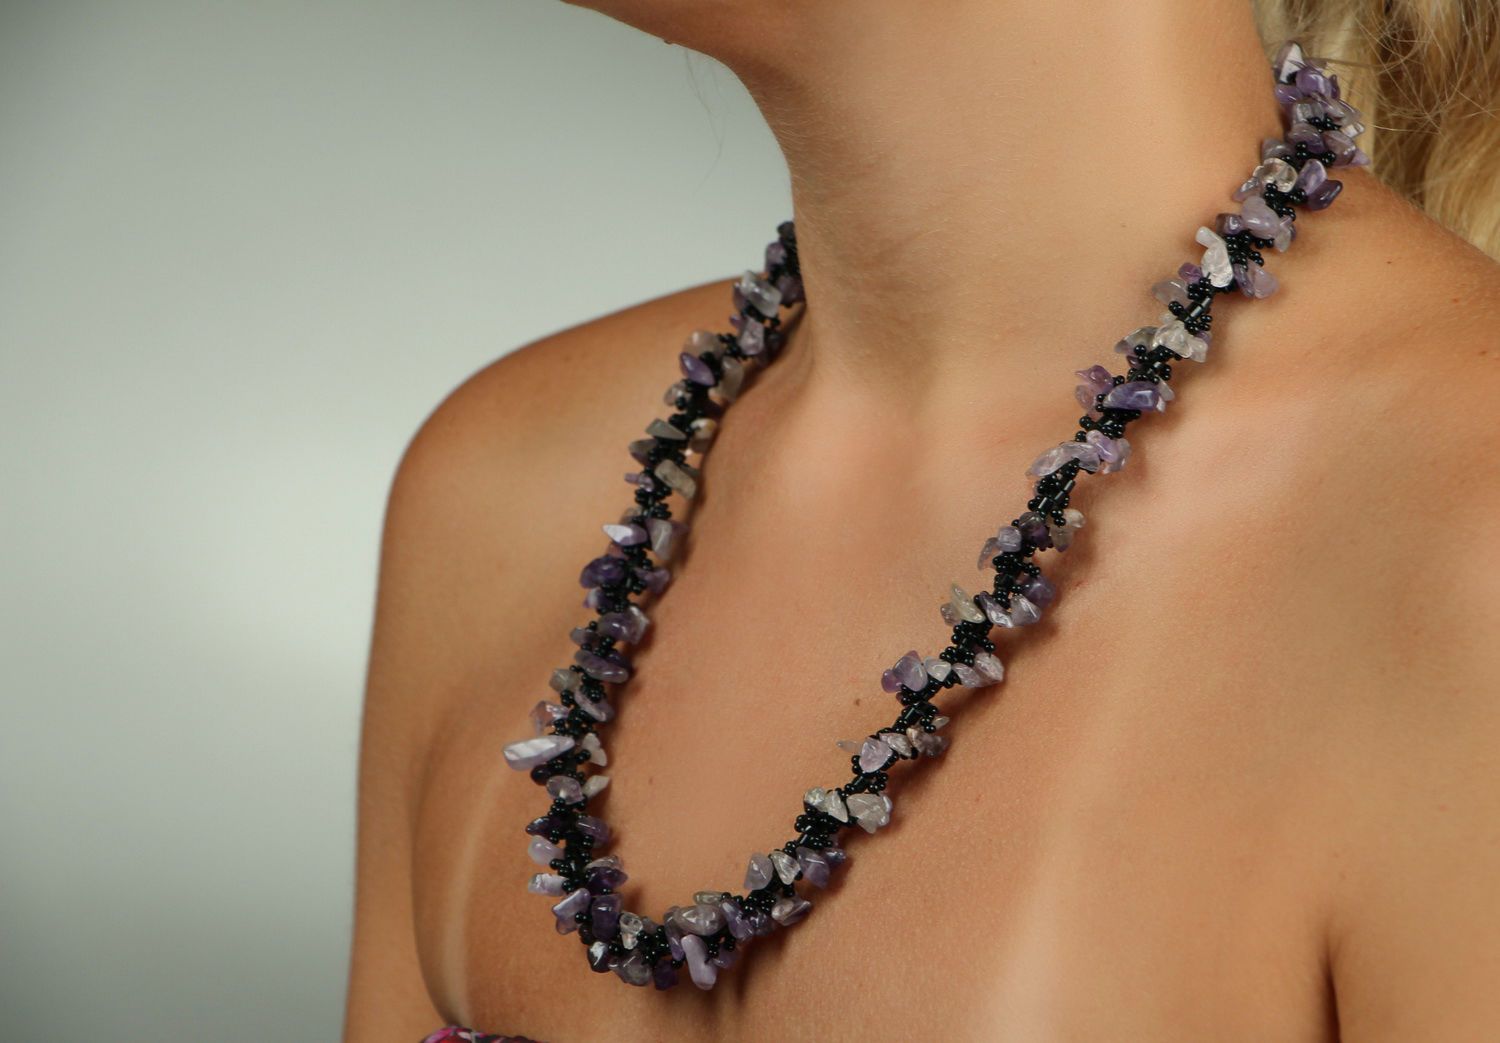 Necklace made of beads and amethyst photo 5